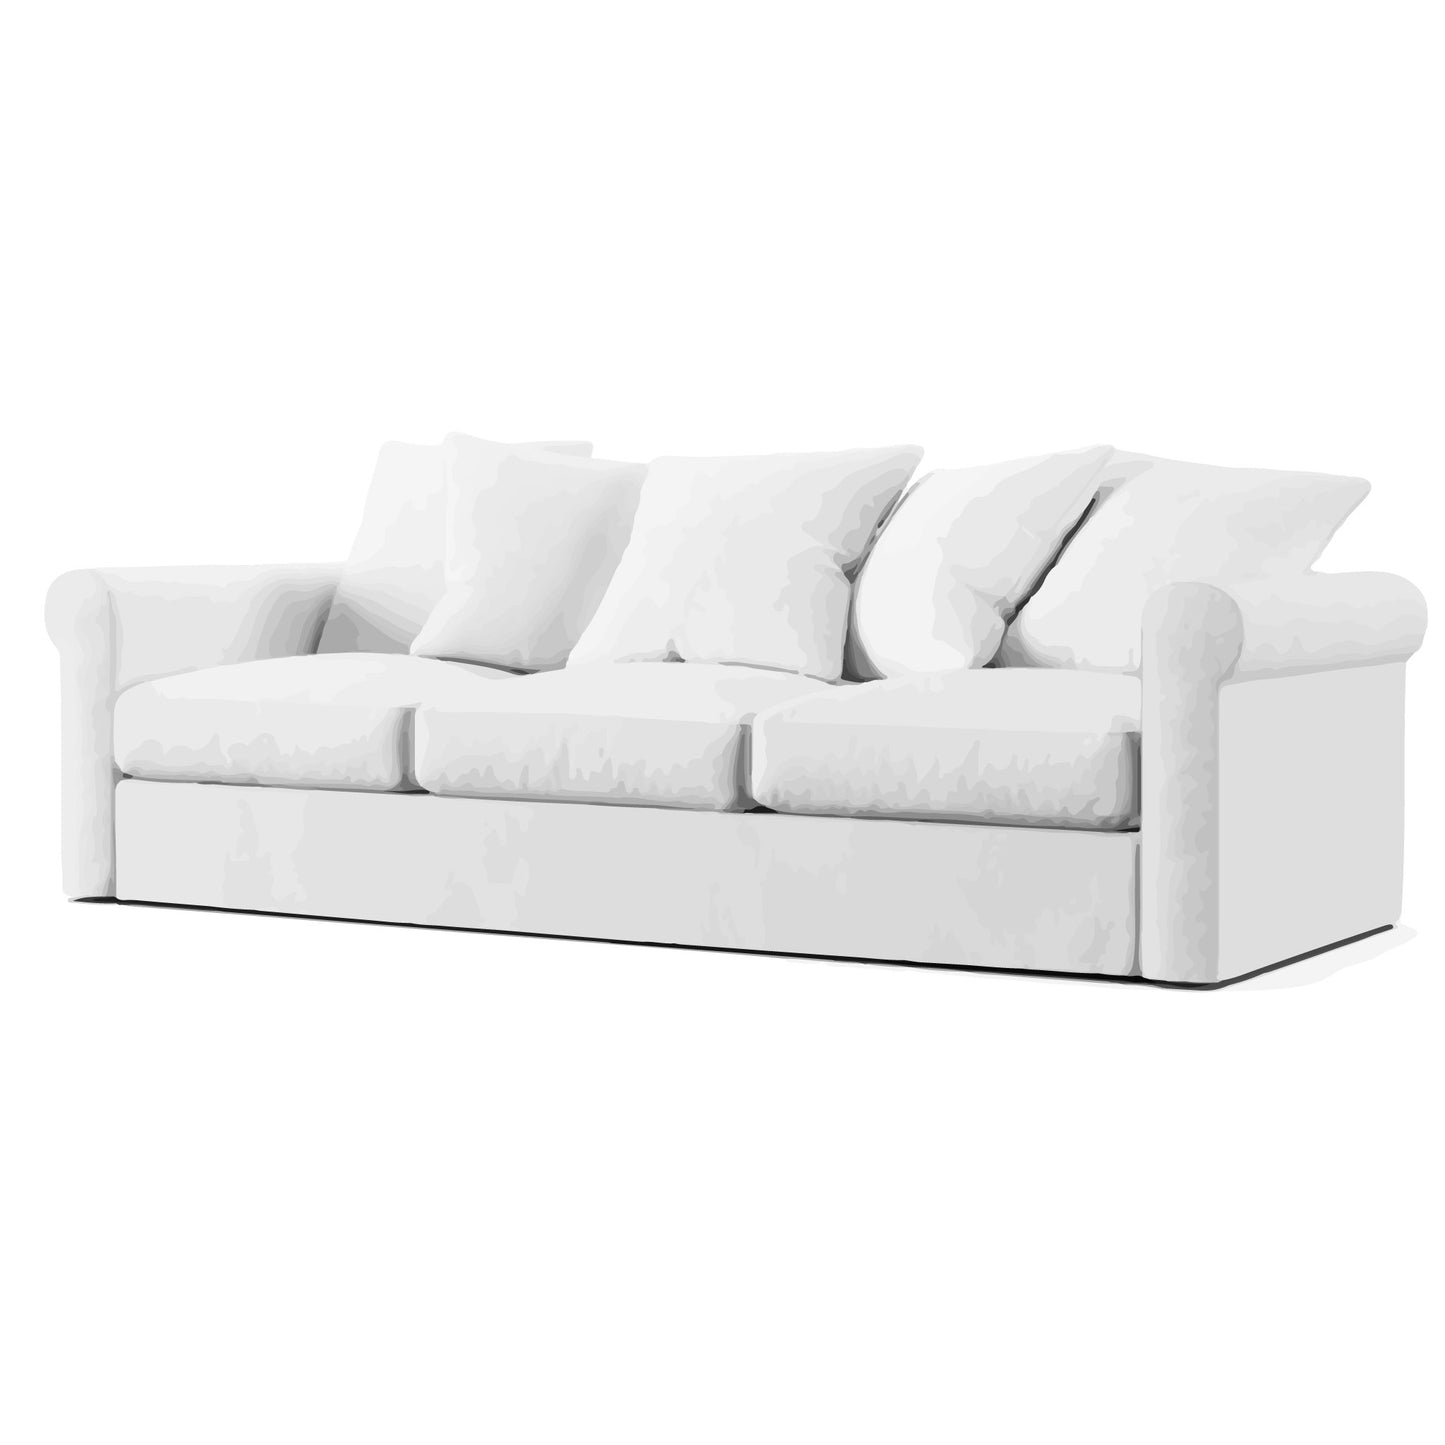 Gronlid 3 Seater Sofa Cover